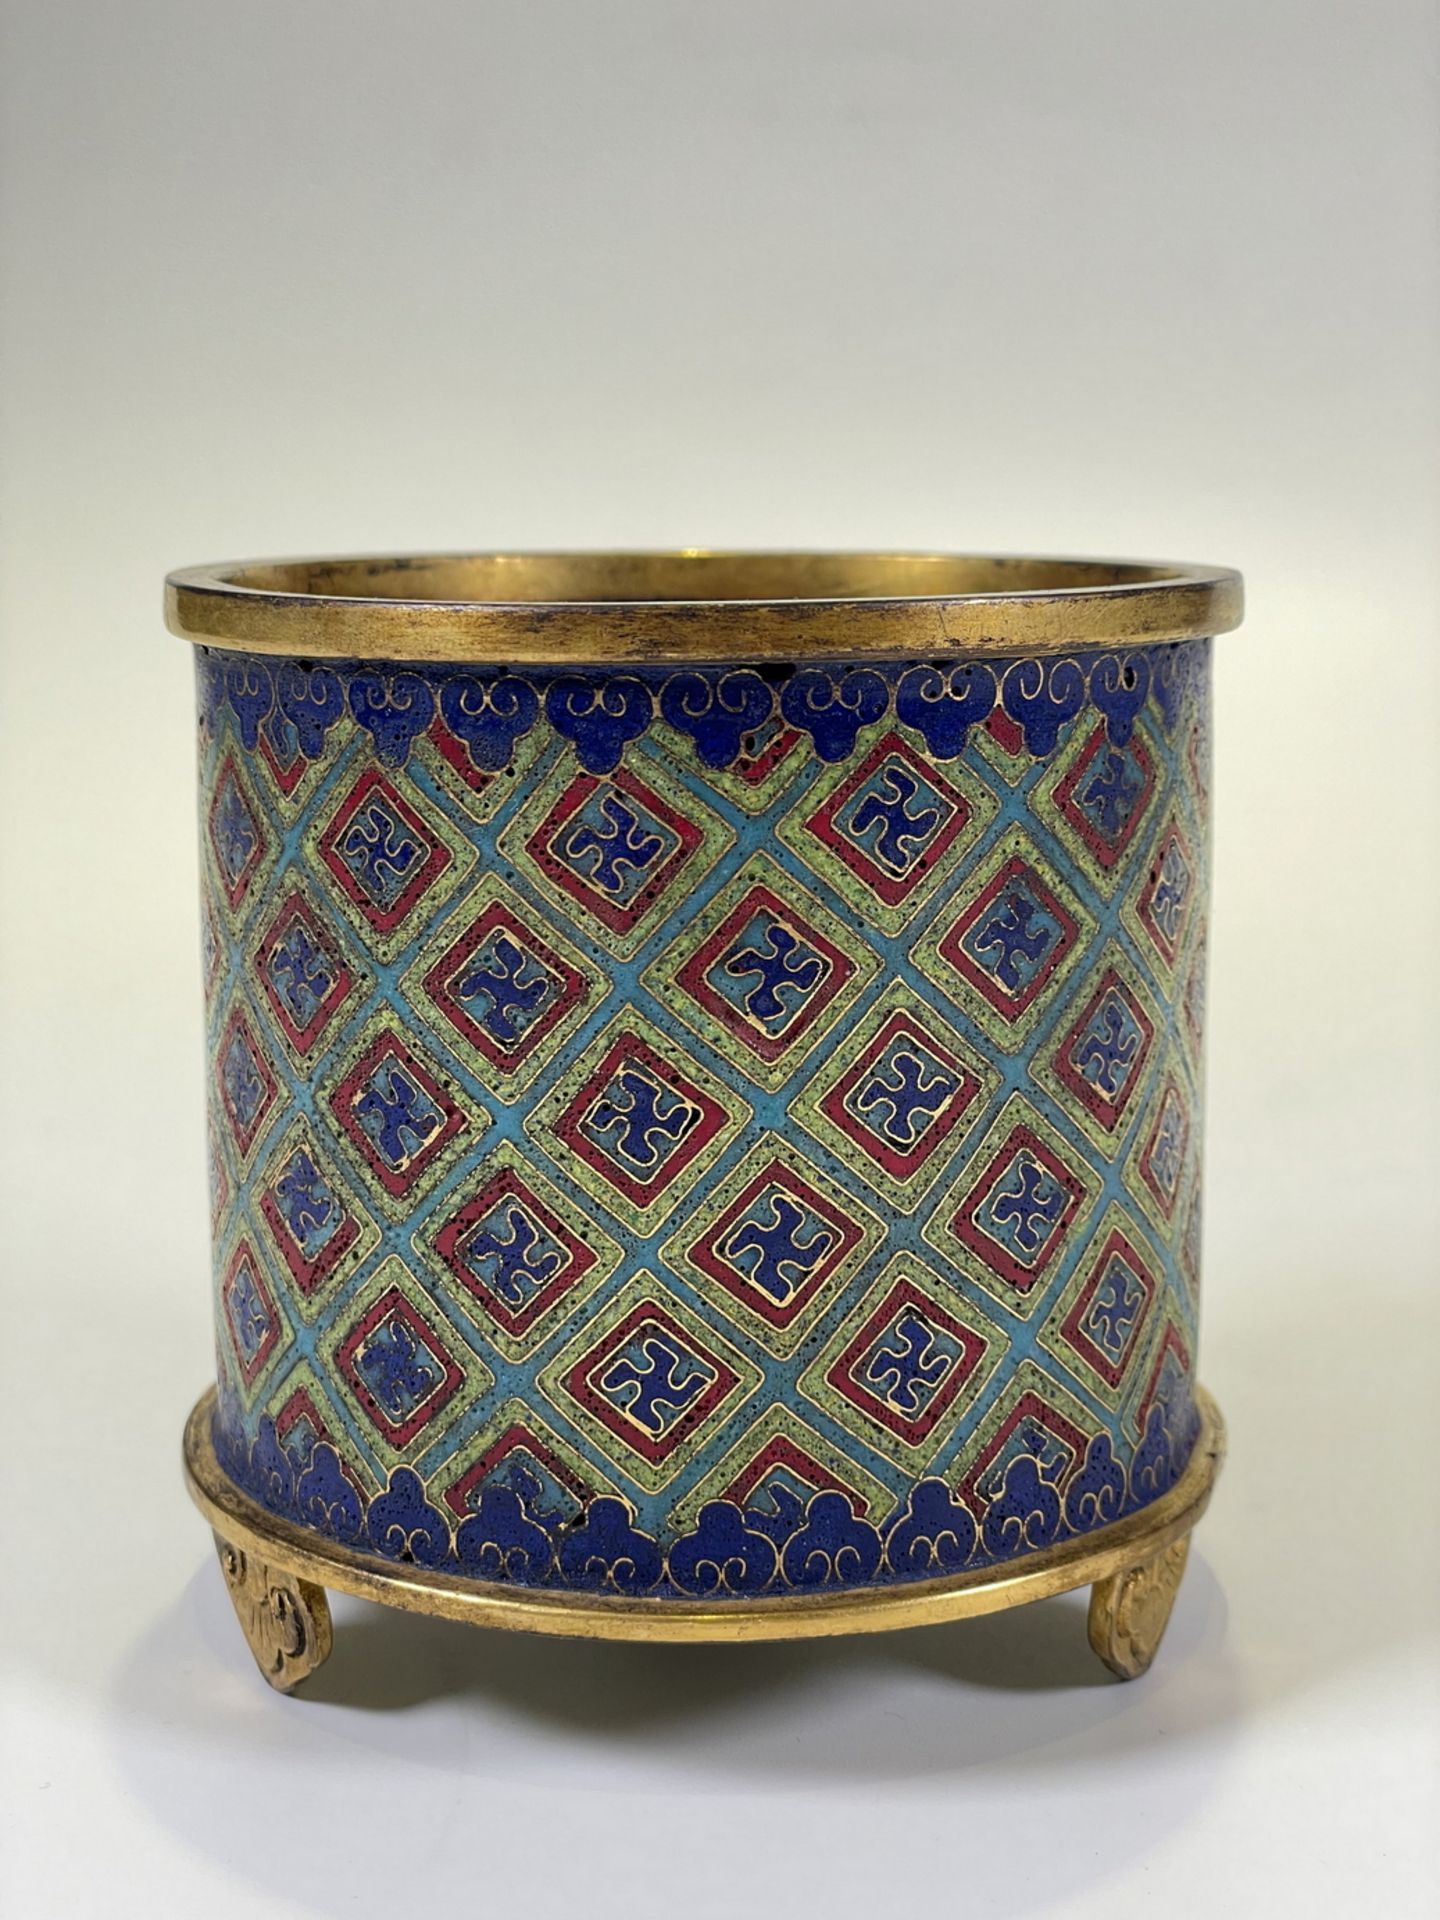 FINE CHINESE CLOISONNE, 18TH/19TH Century Pr. Collection of NARA private gallary.  - Bild 3 aus 11